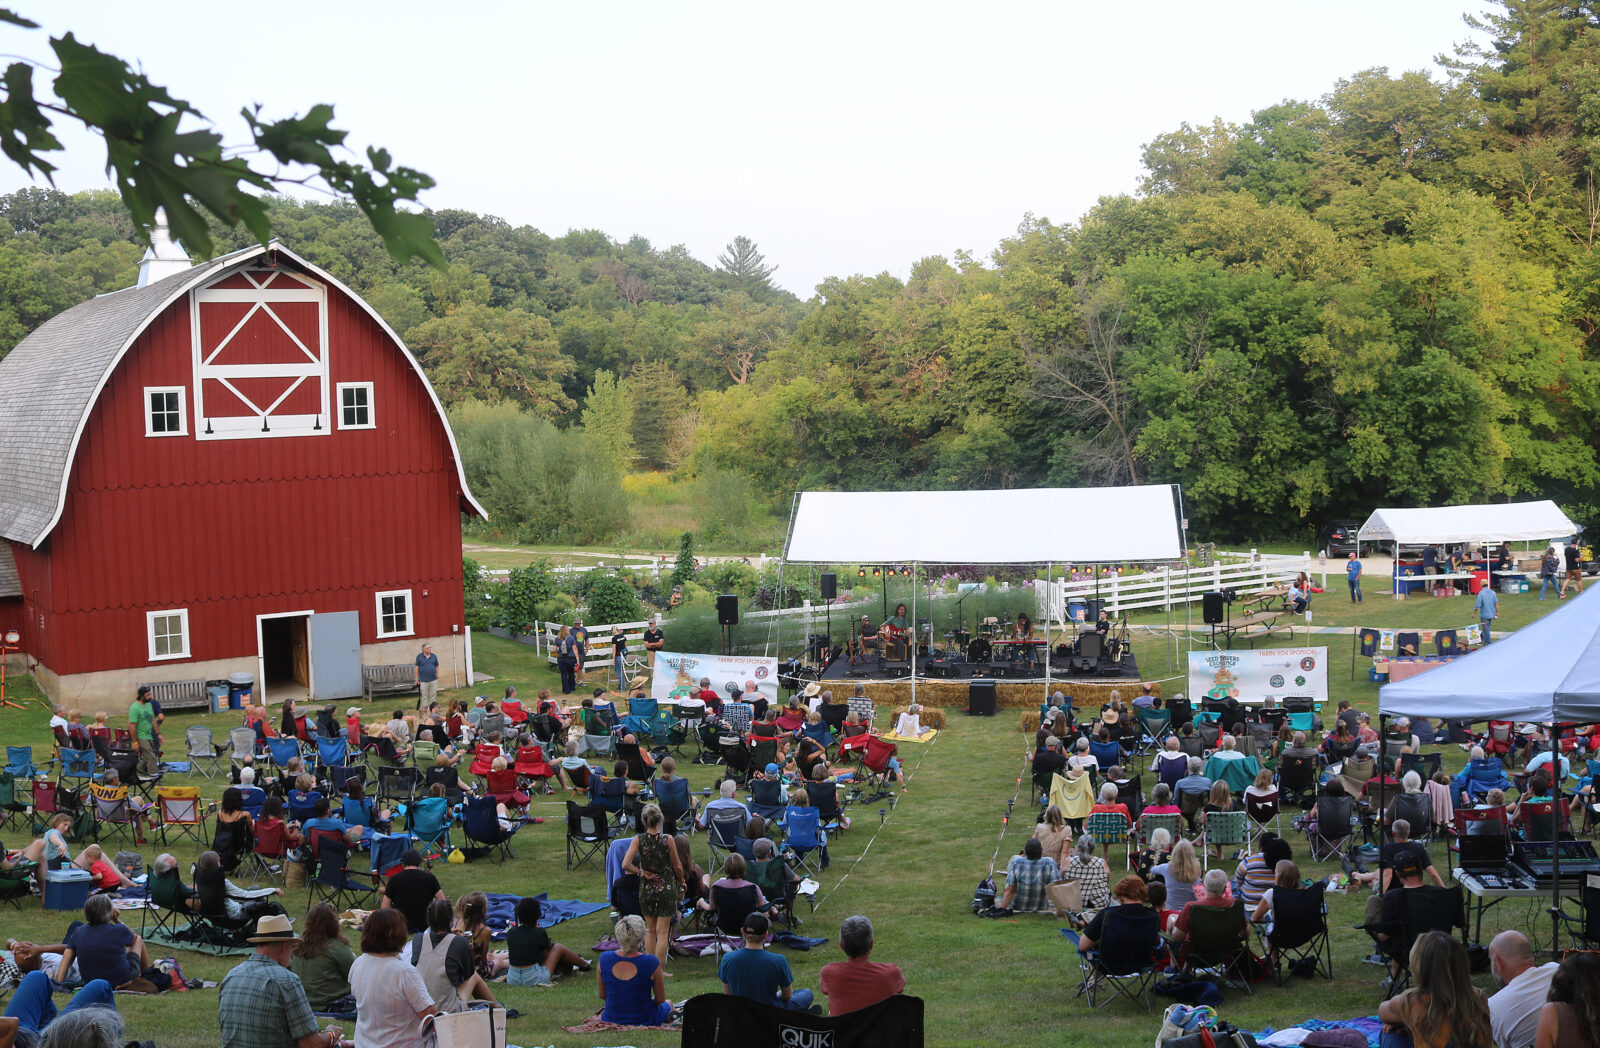 Benefit Concert crowd gathered on a lawn in front of a stage and red barn.